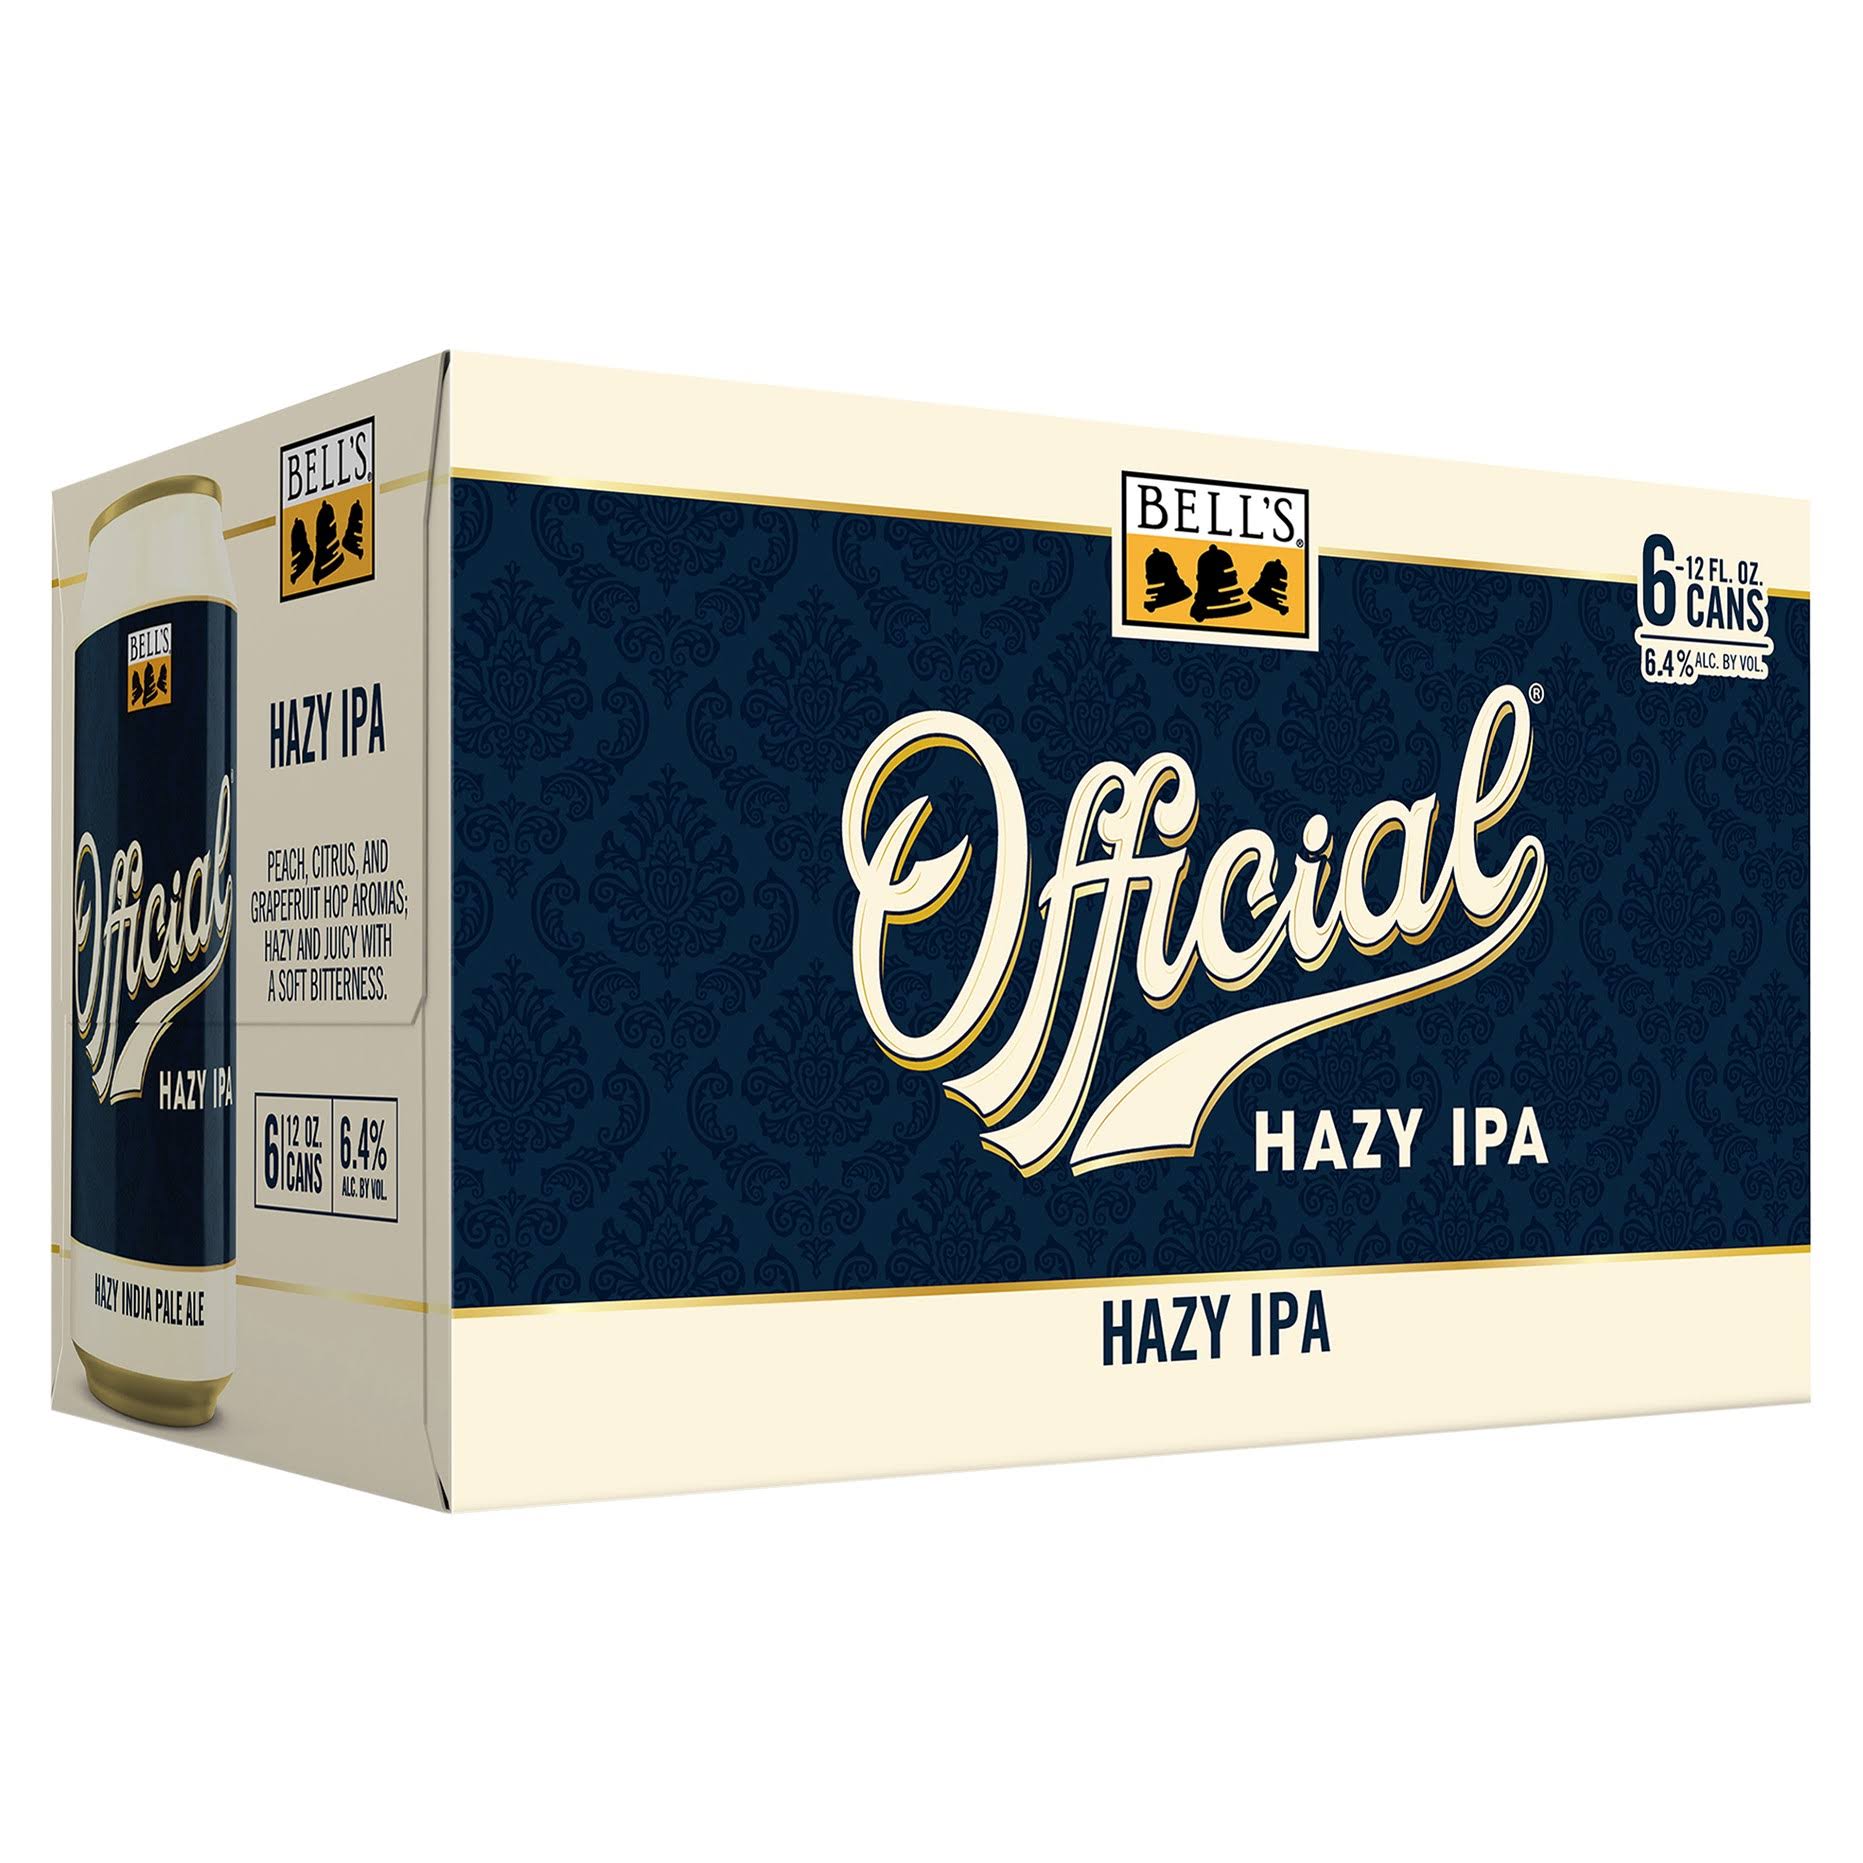 Bell's Beer, Hazy IPA, Official - 6 pack, 12 fl oz cans